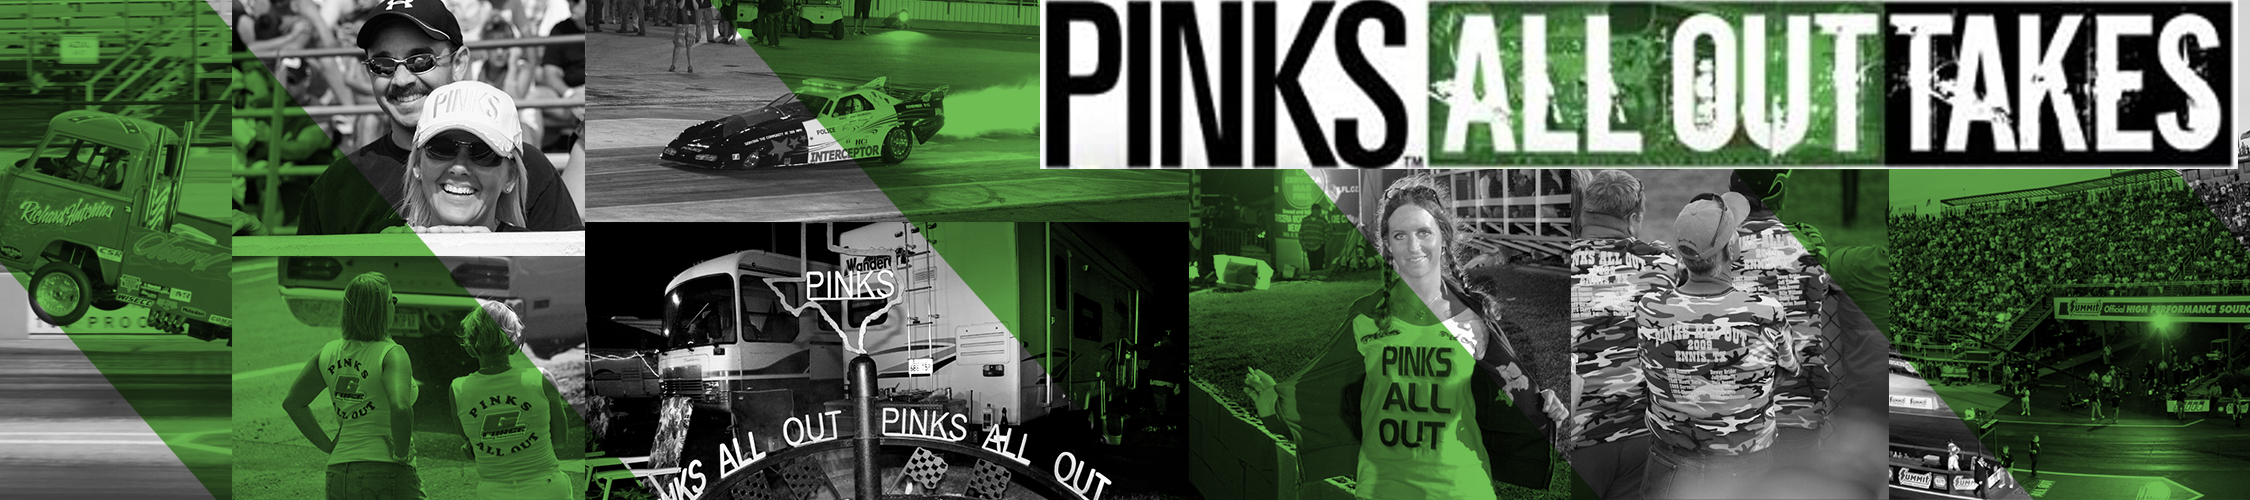 About Pinks All Outtakes